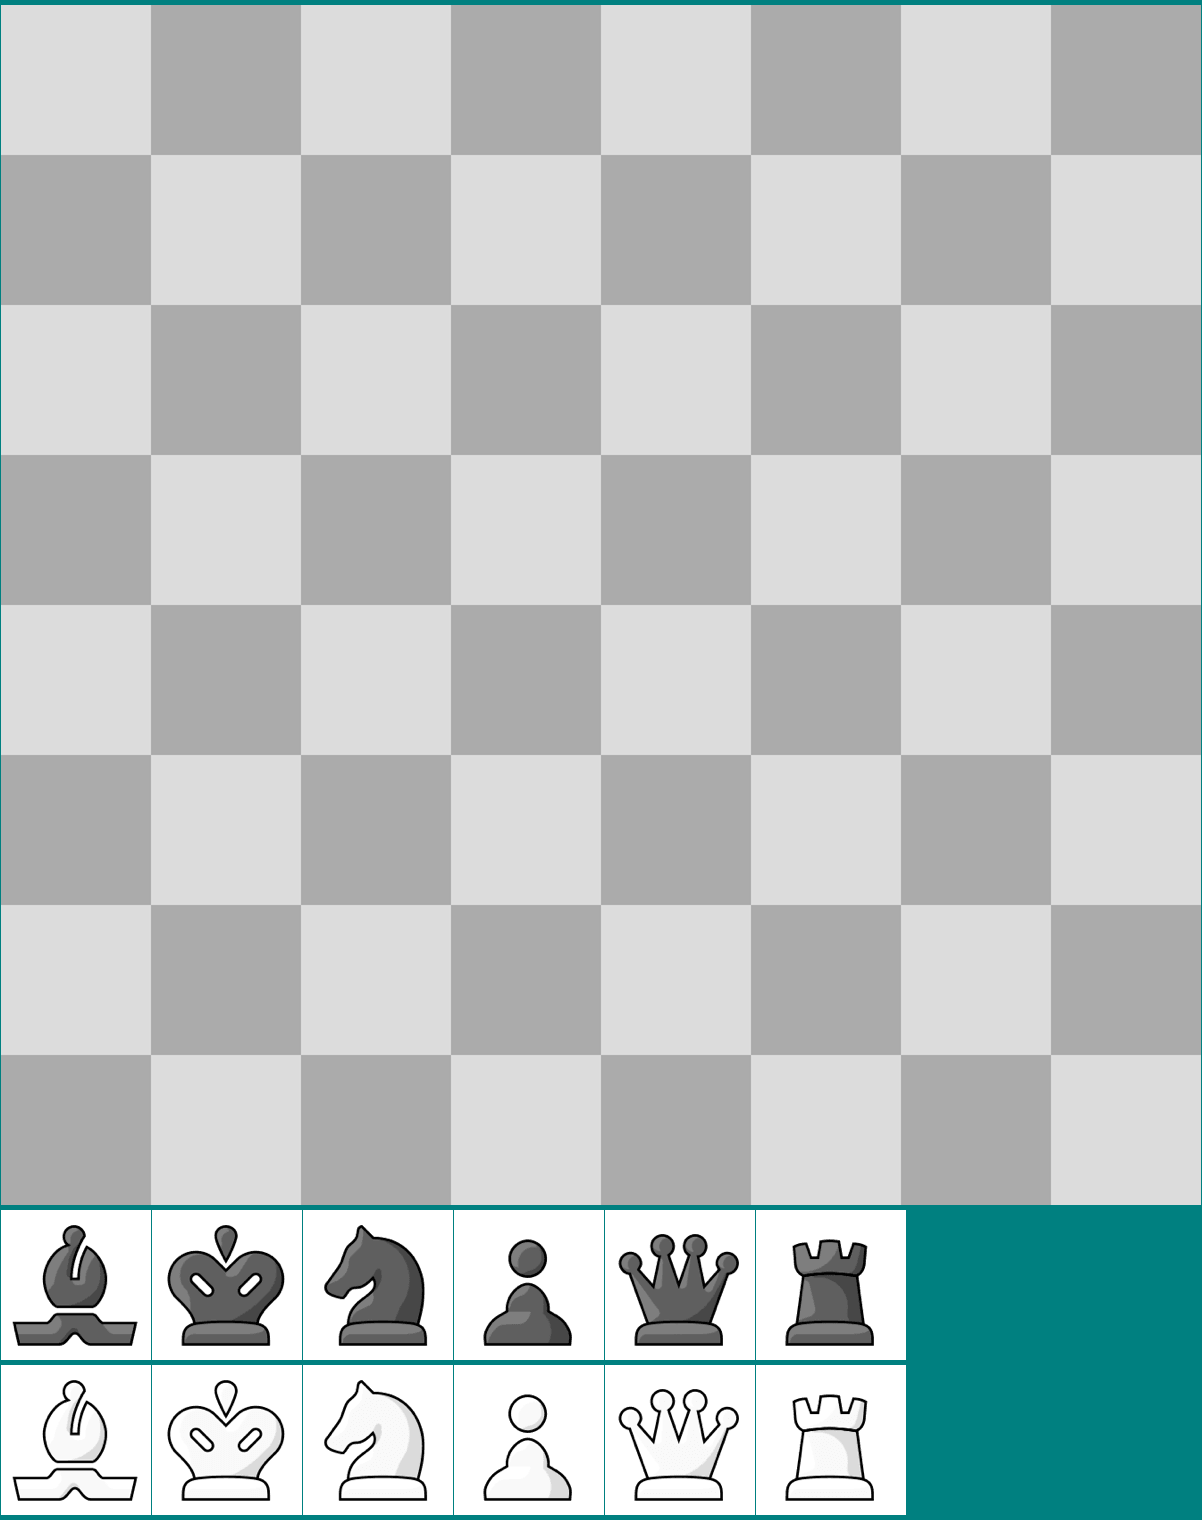 Board and Chess Pieces (Light)